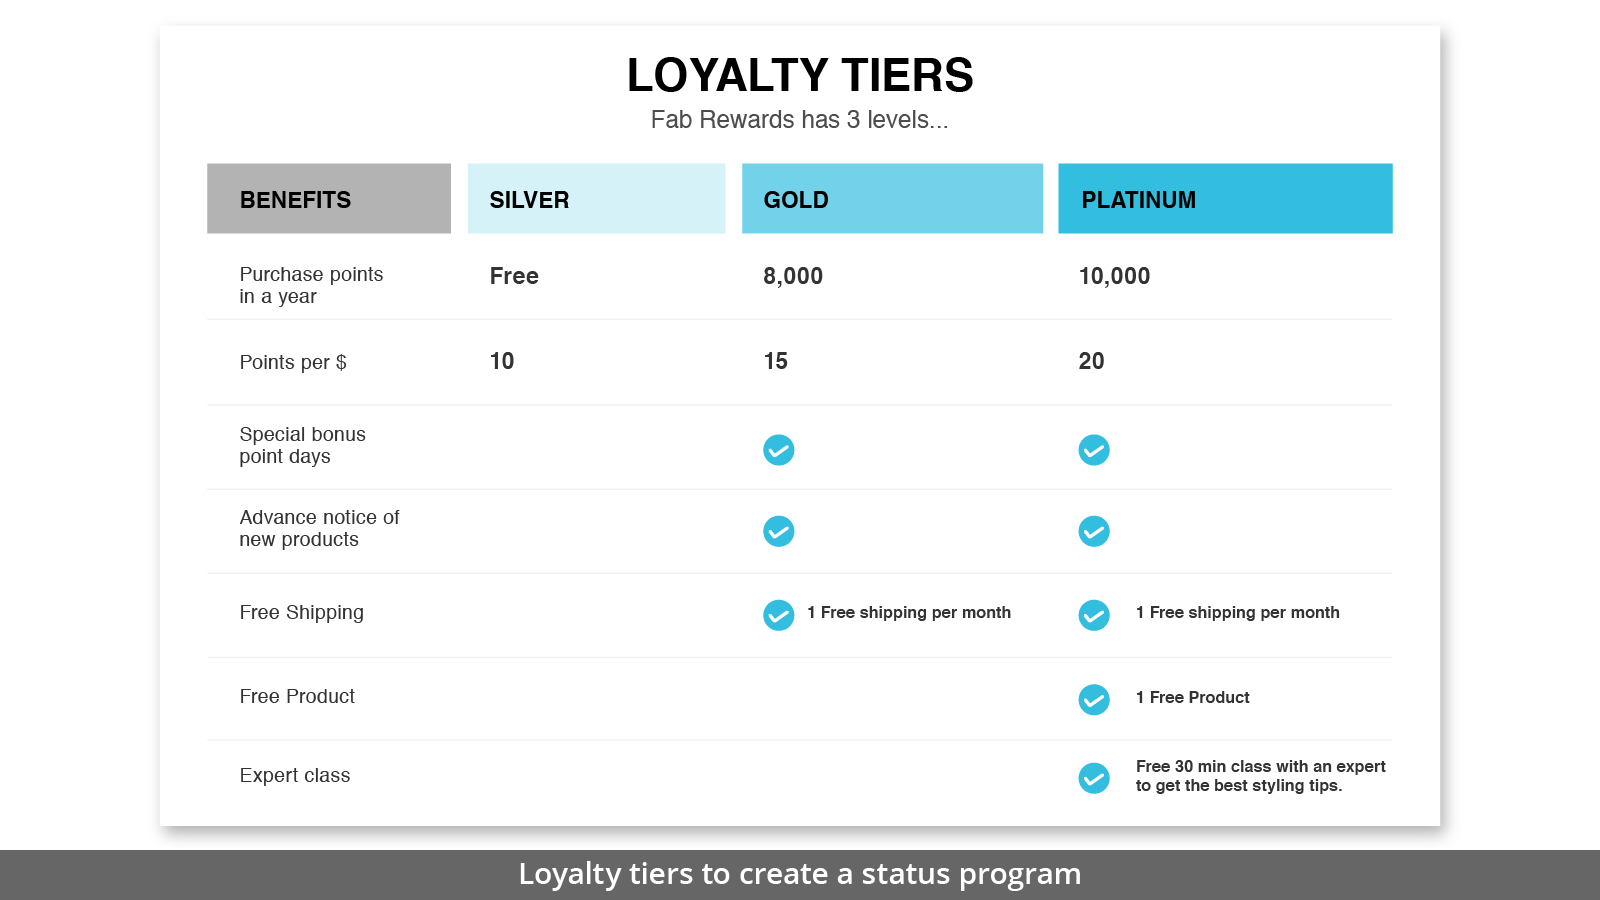 LOYALTY TIERS TO CREATE A STATUS PROGRAM